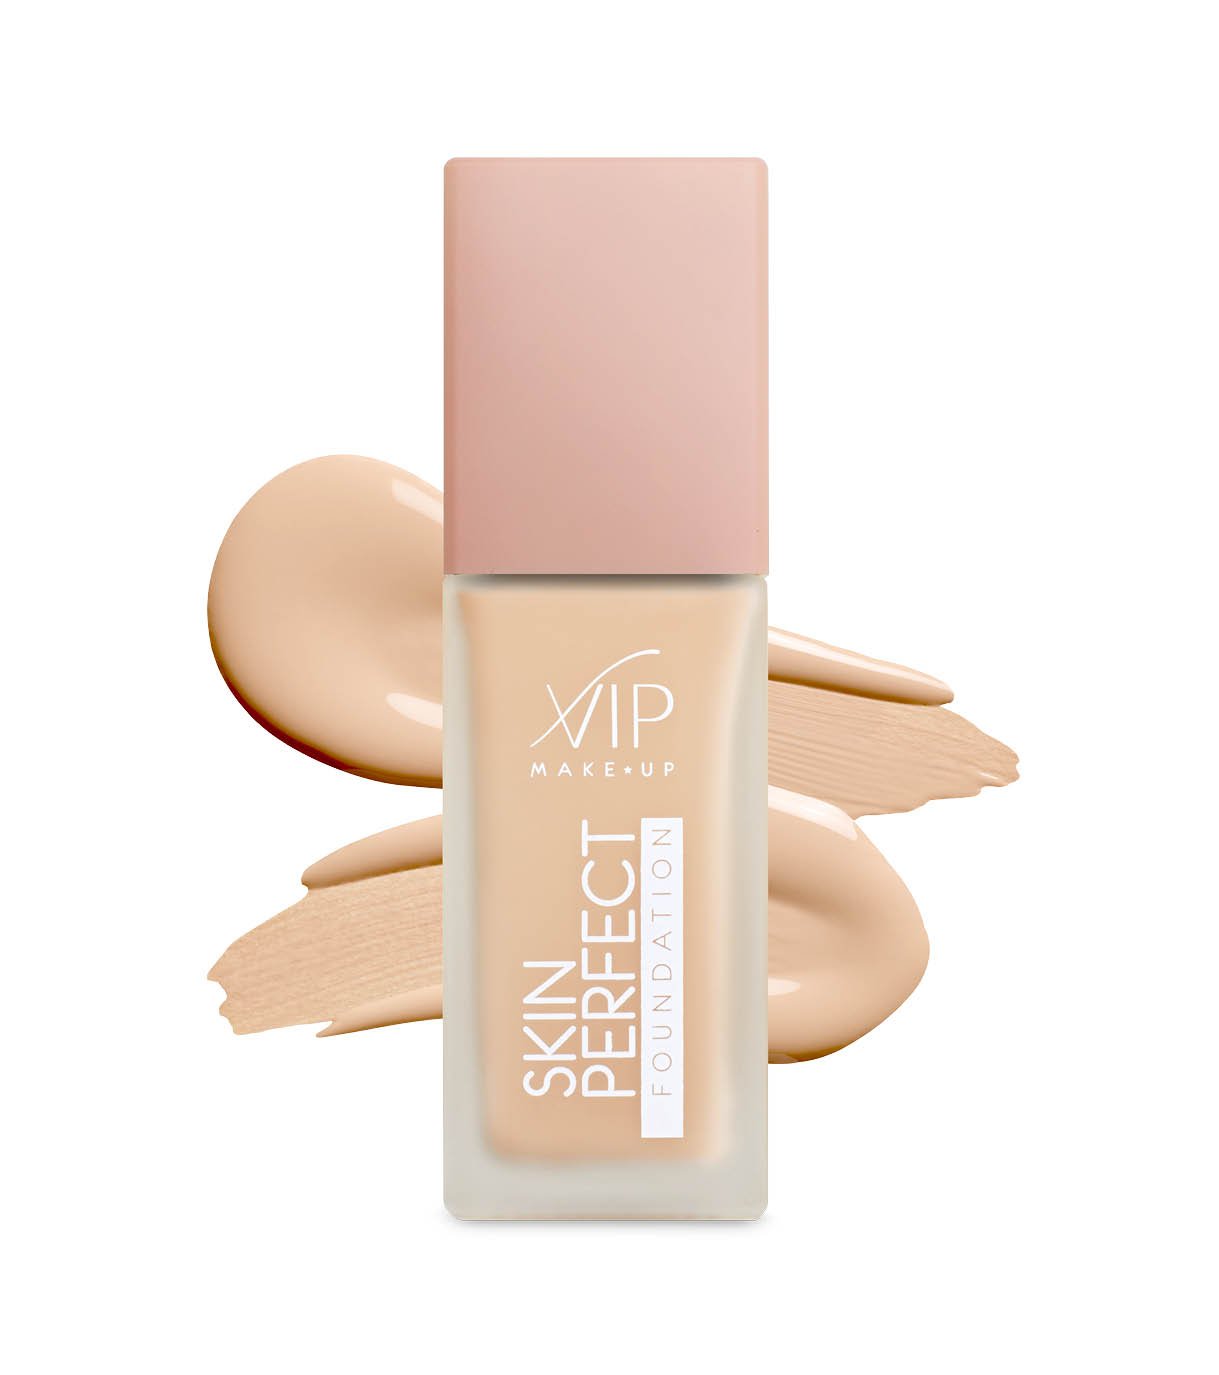 VIP MAKE-UP SKIN PERFECT FOUNDATION ANTIAGE 30ml